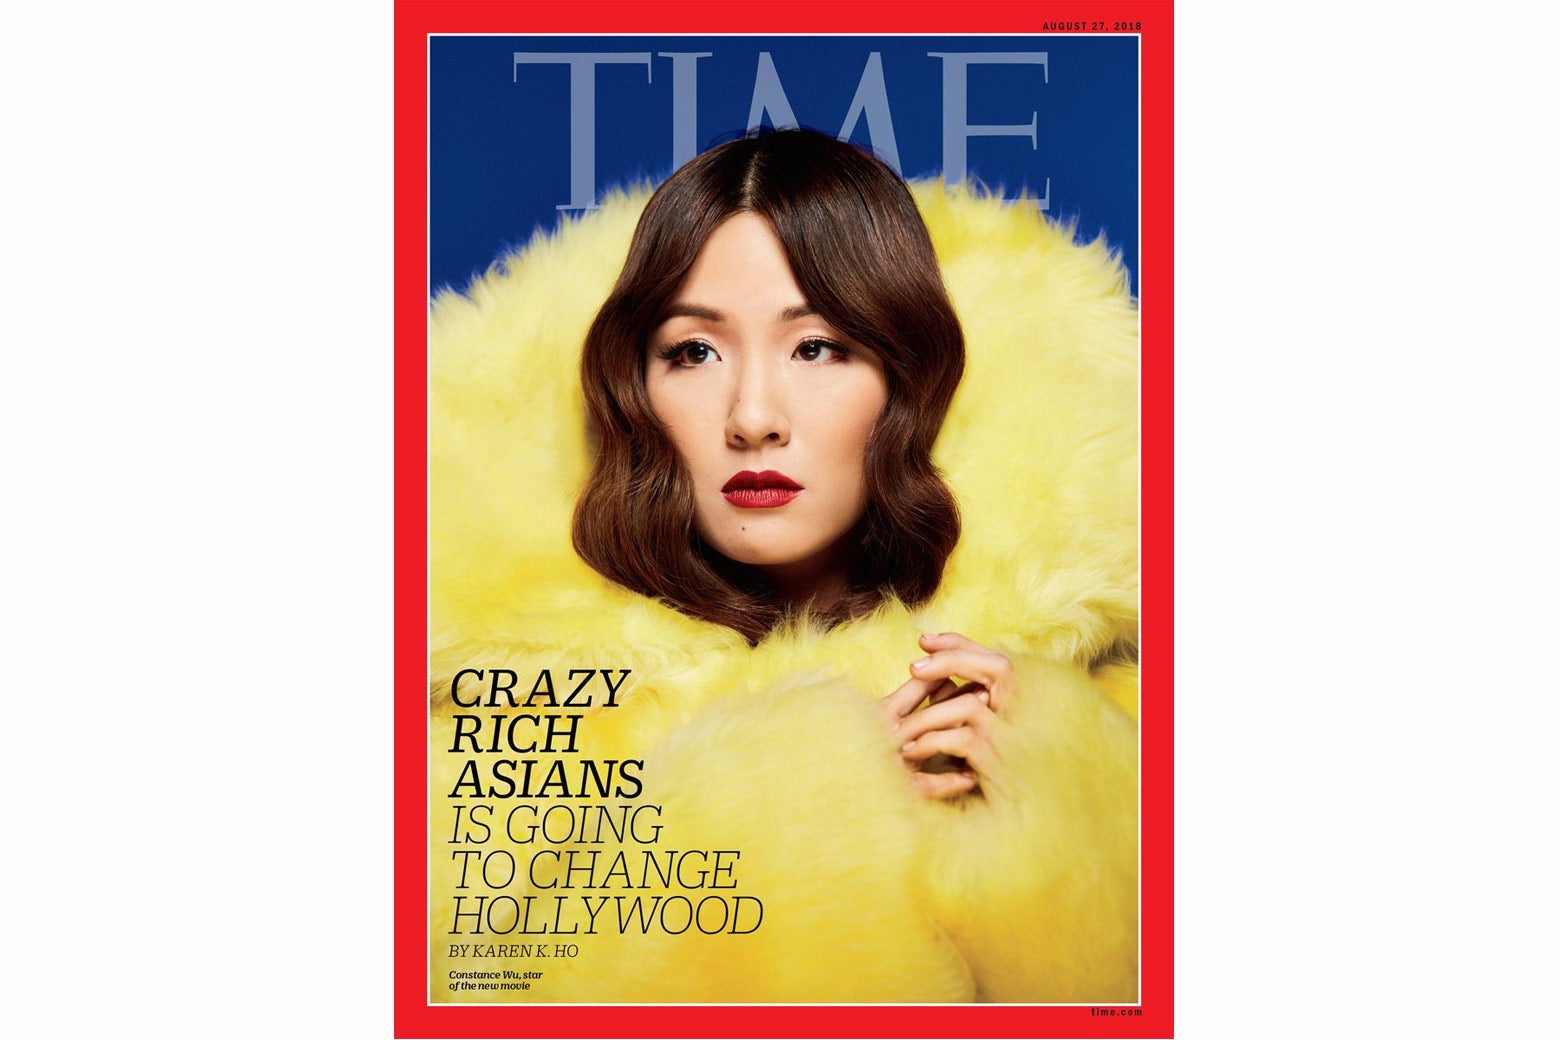 On the cover of Time Magazine, Constance Wu's head is engulfed by a jacket of fluffy yellow fur that takes up most of the cover. The headline is "Crazy Rich Asians Is Going to Change Hollywood."